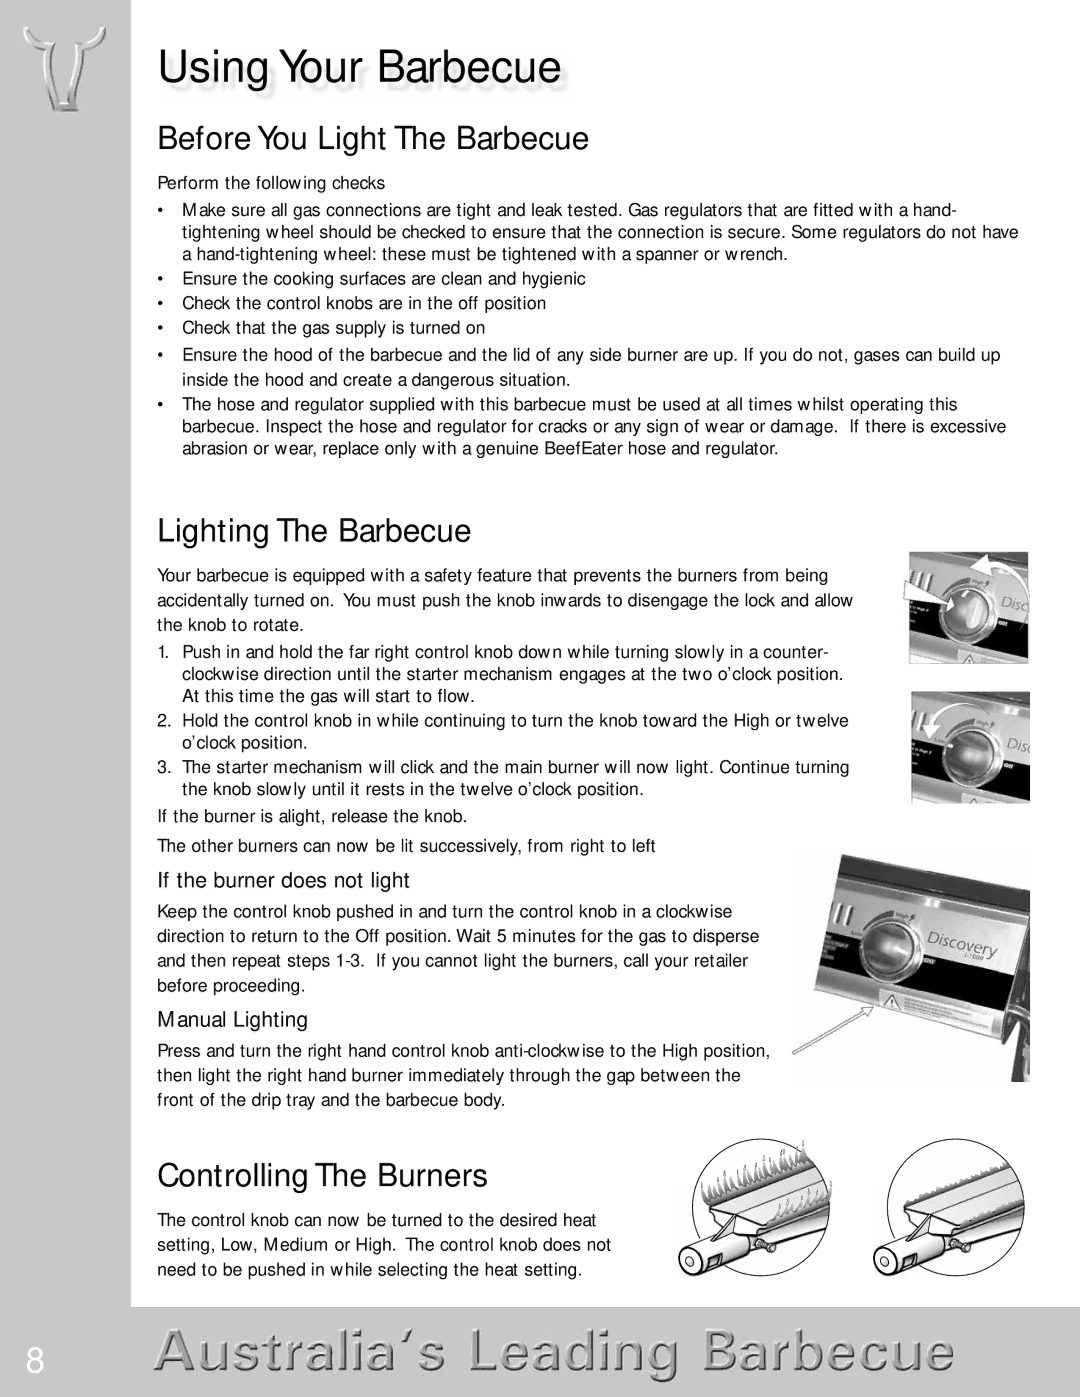 BeefEater Discovery Series manual Using Your Barbecue, Before You Light The Barbecue, Lighting The Barbecue 